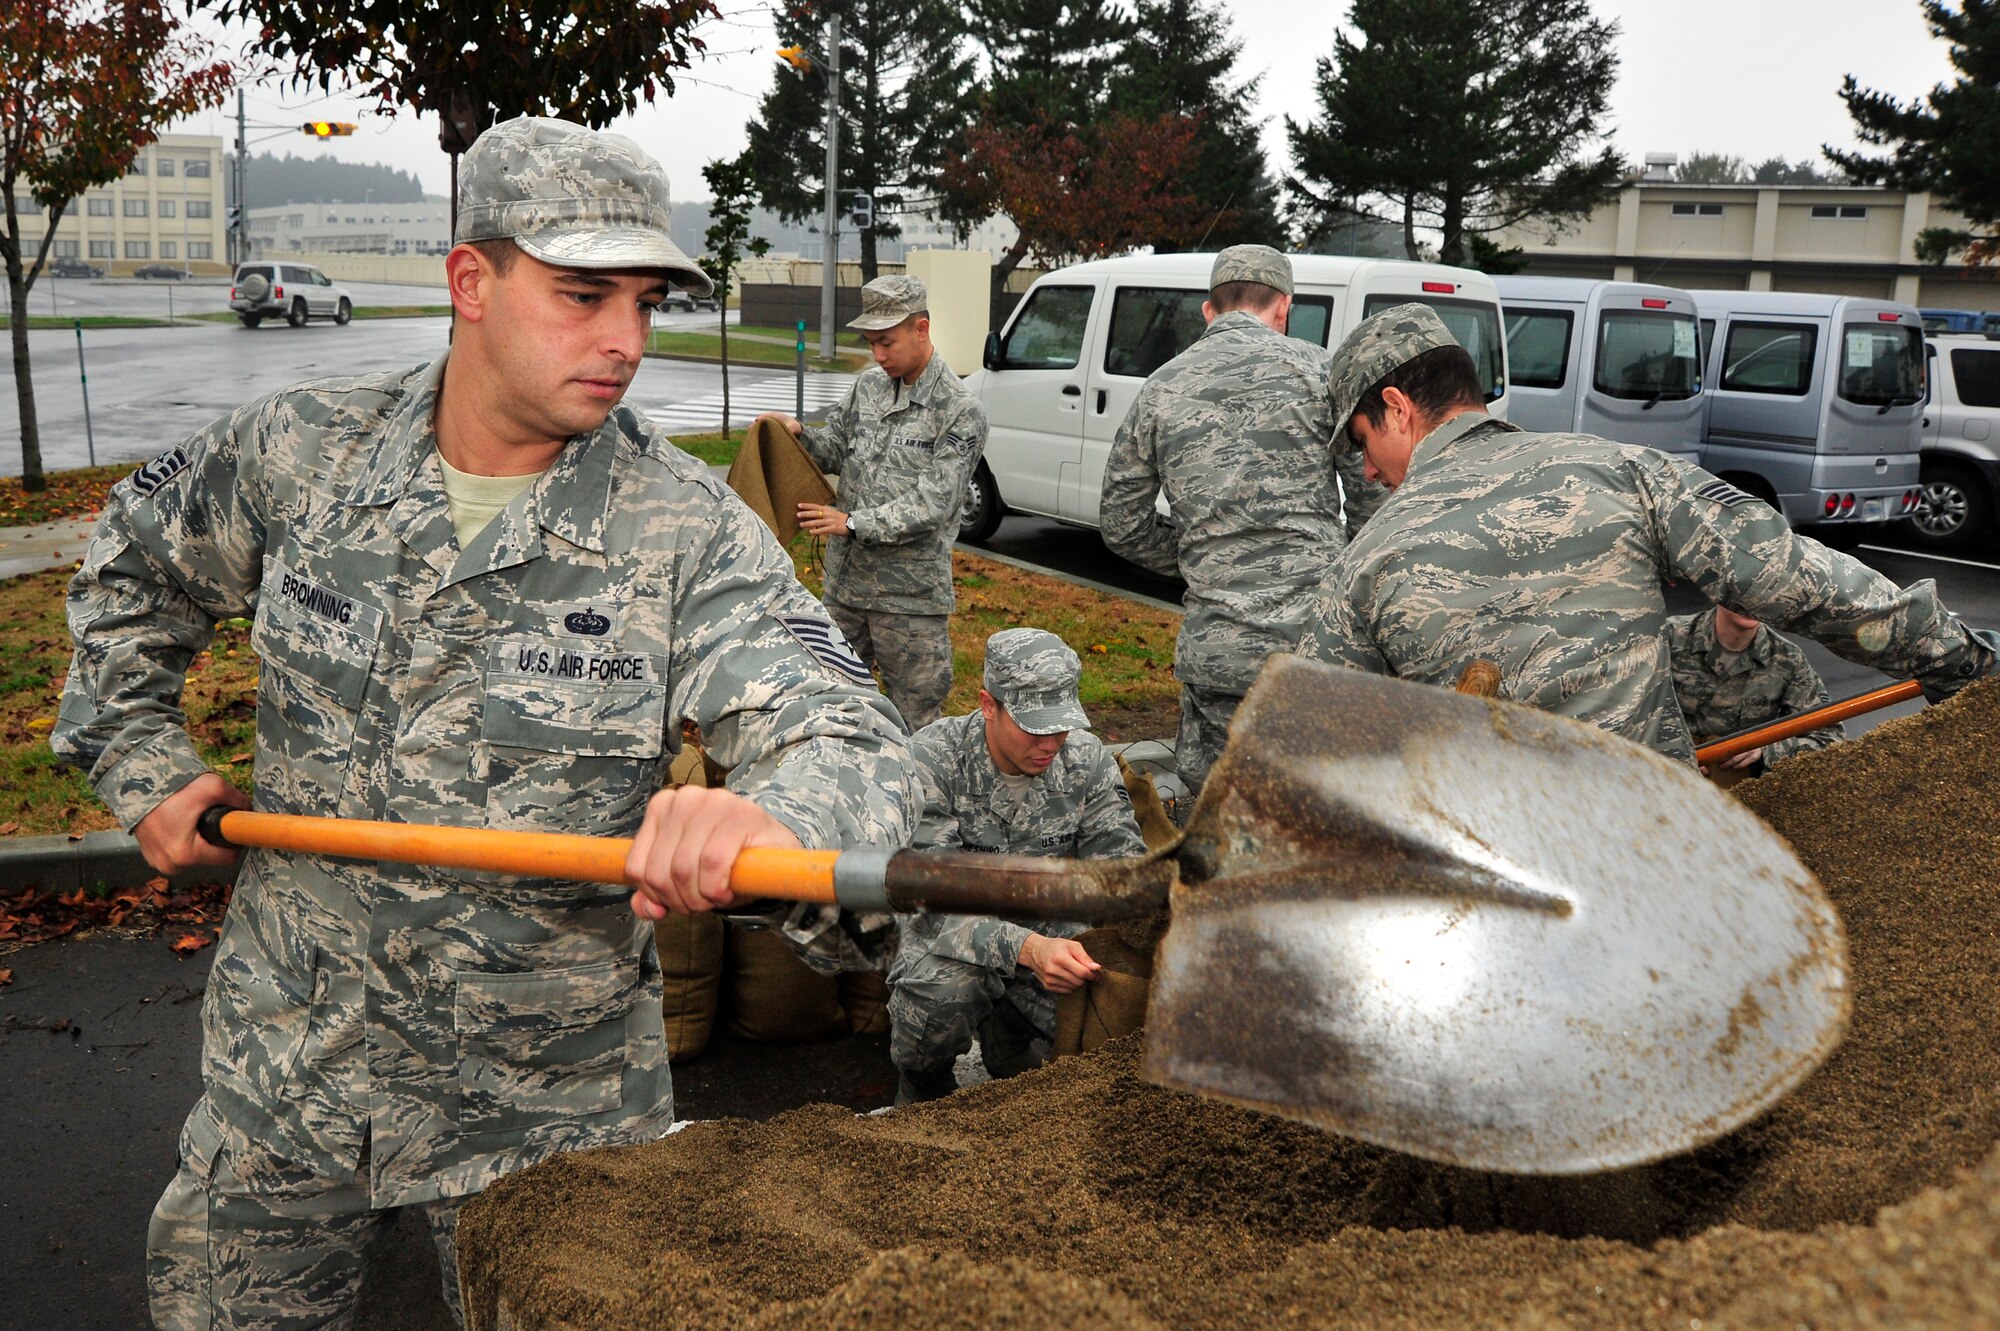 MISAWA AIR BASE, Japan – U.S. Air Force Tech. Sgt. Brian Browning, 35th Communications Squadron, shovels sand during an operational readiness exercise here Nov. 6. Browning and his team shoveled the sand into sandbags in order to protect their buildings in case of simulated attack. The 35th Fighter Wing is currently going through an ORE in preparation for an operational readiness inspection in December. (U.S. Air Force photo/Staff Sgt. Nathan Lipscomb)